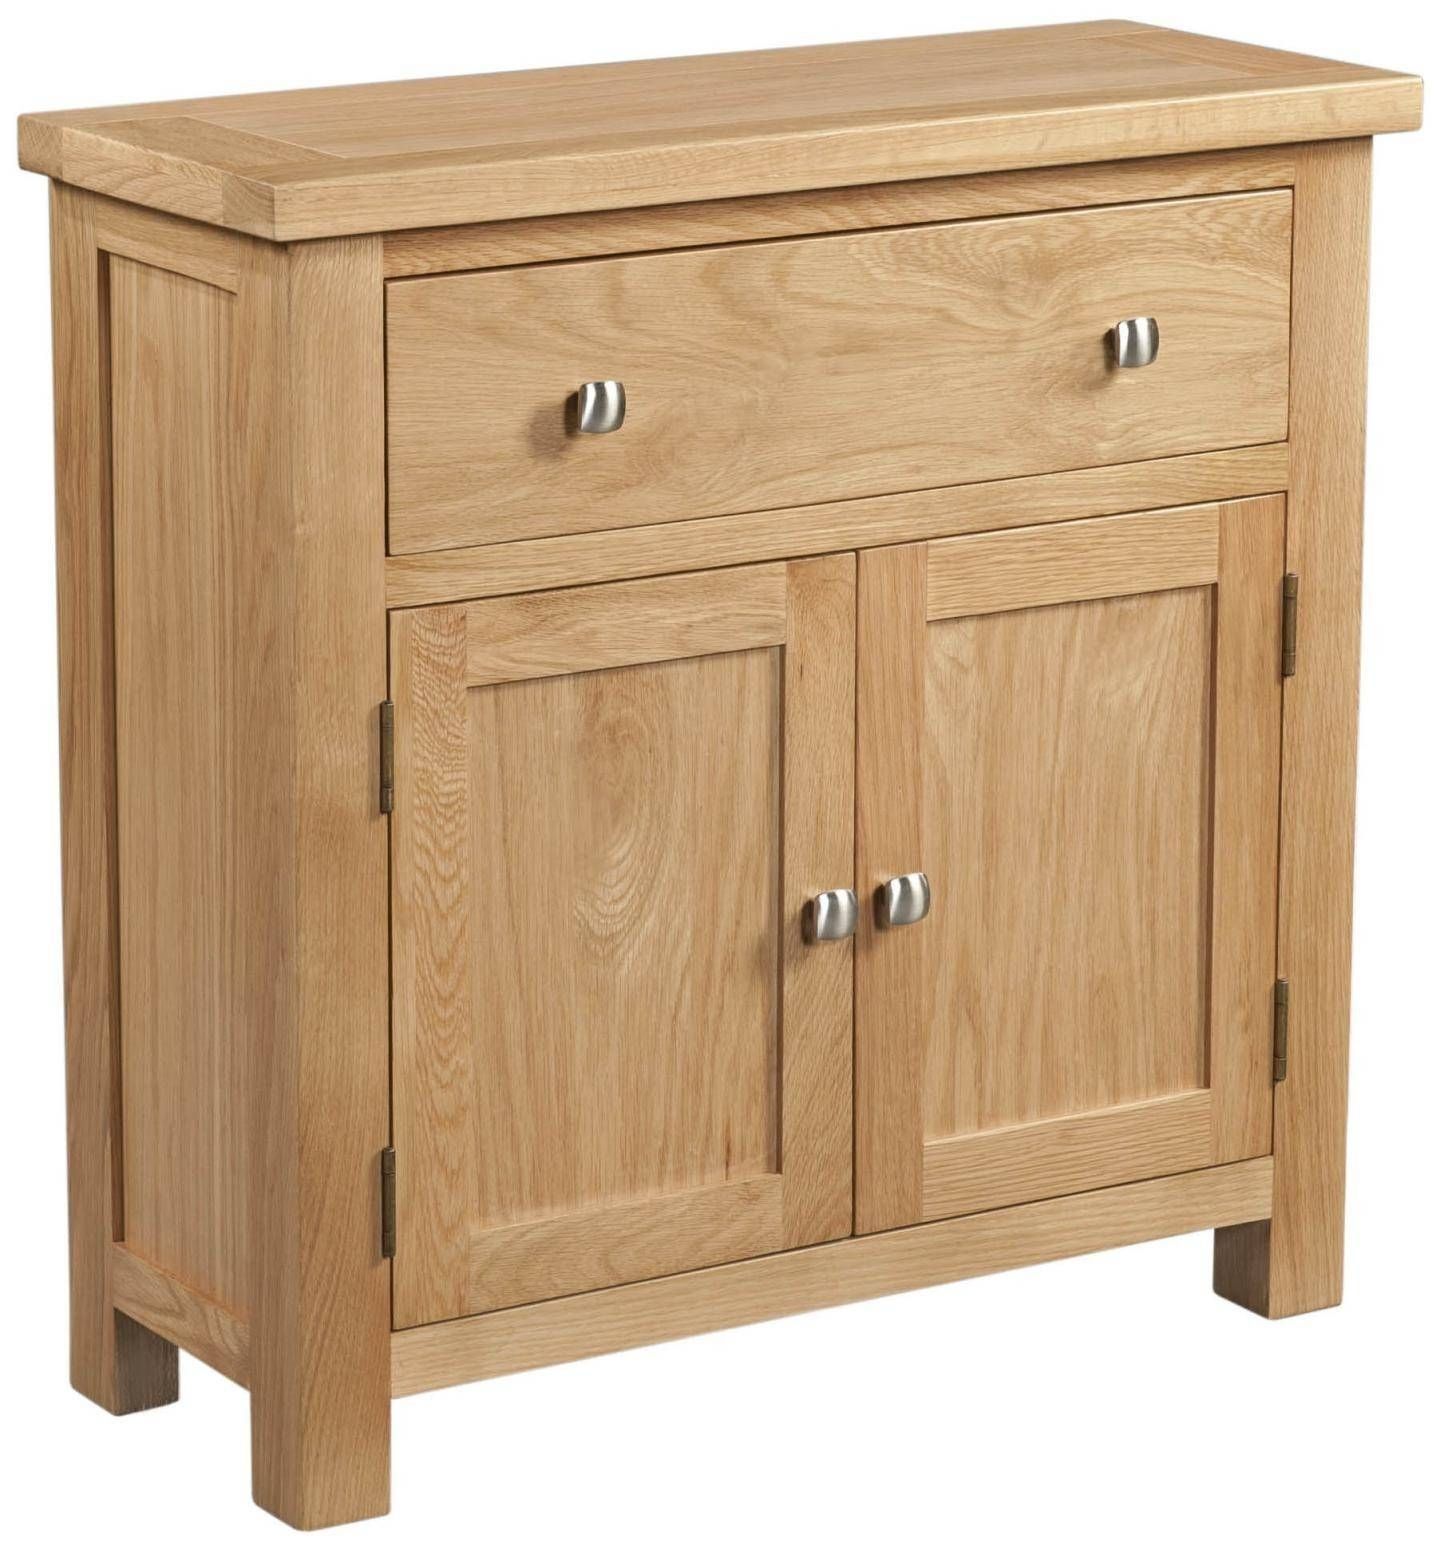 Lovely Pine & Oak Sideboards | Willoby's Furniture Swindon, Wiltshire Within Oak Sideboards For Sale (Photo 10 of 30)